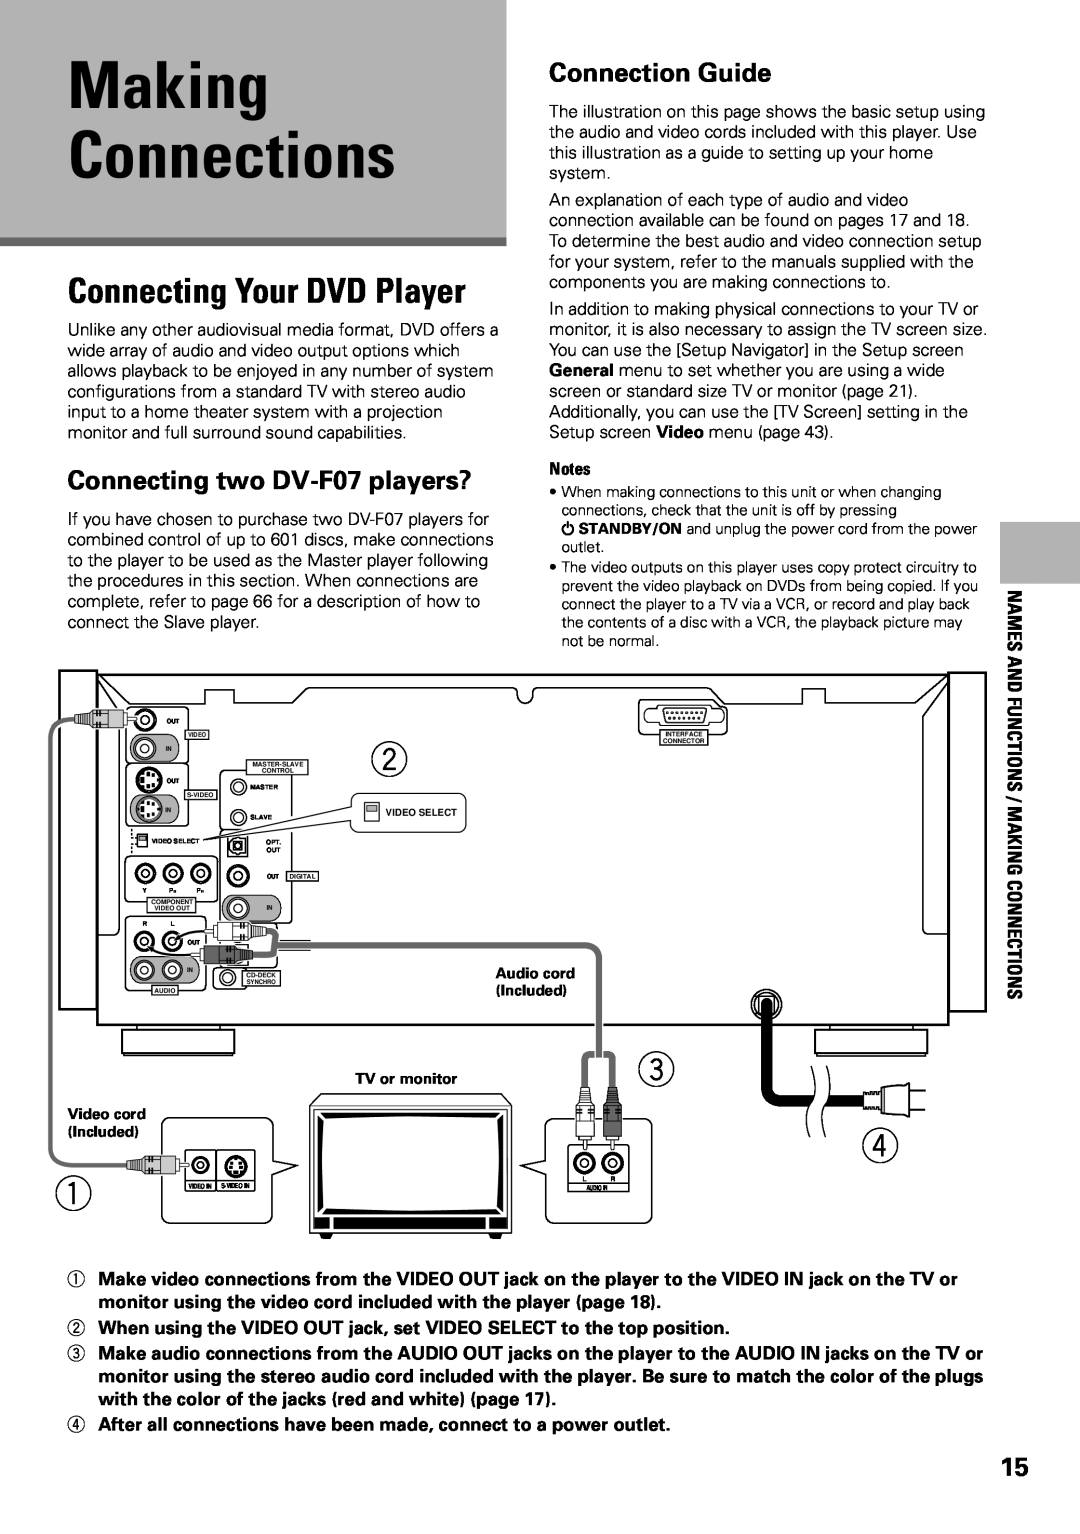 Pioneer Making Connections, Connecting Your DVD Player, Connecting two DV-F07 players?, Connection Guide, Names 